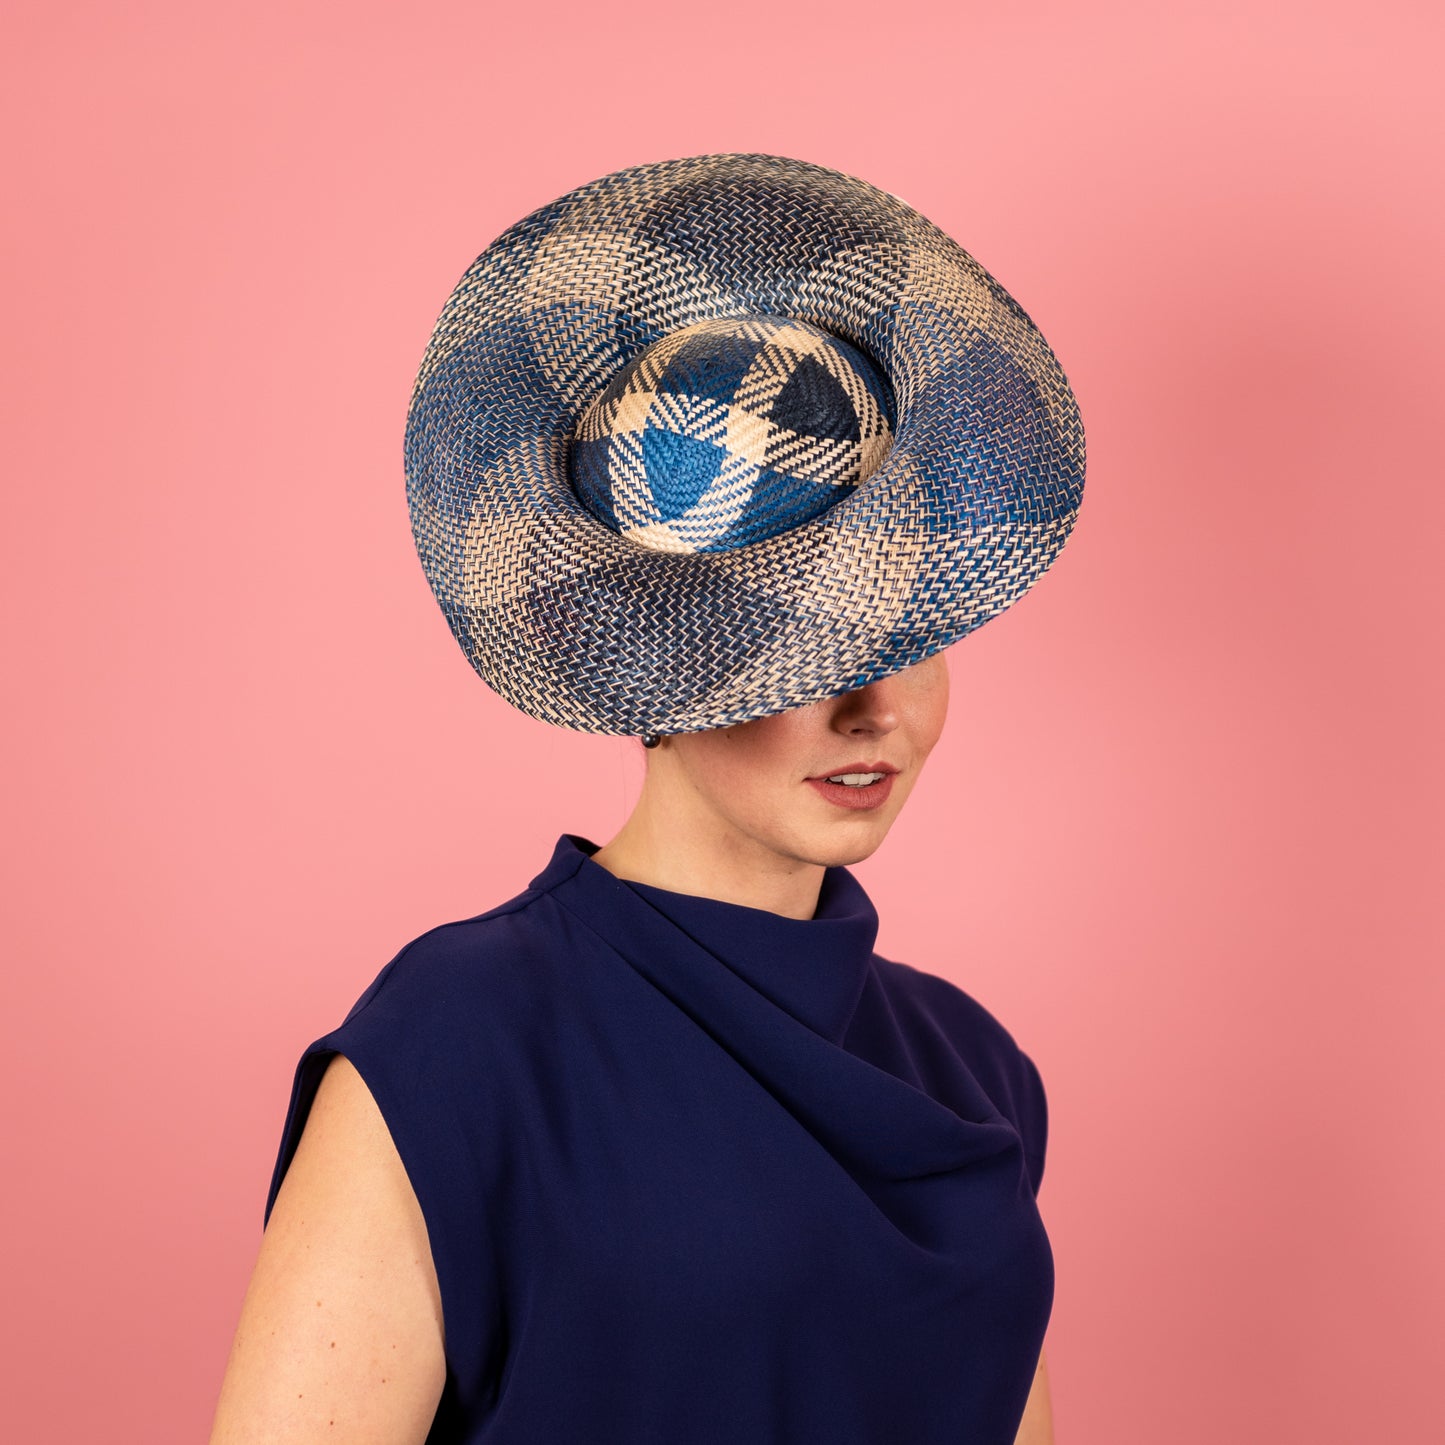 Gabriela Shaped Hat in Blue, Cream and Navy with silk poppy trim